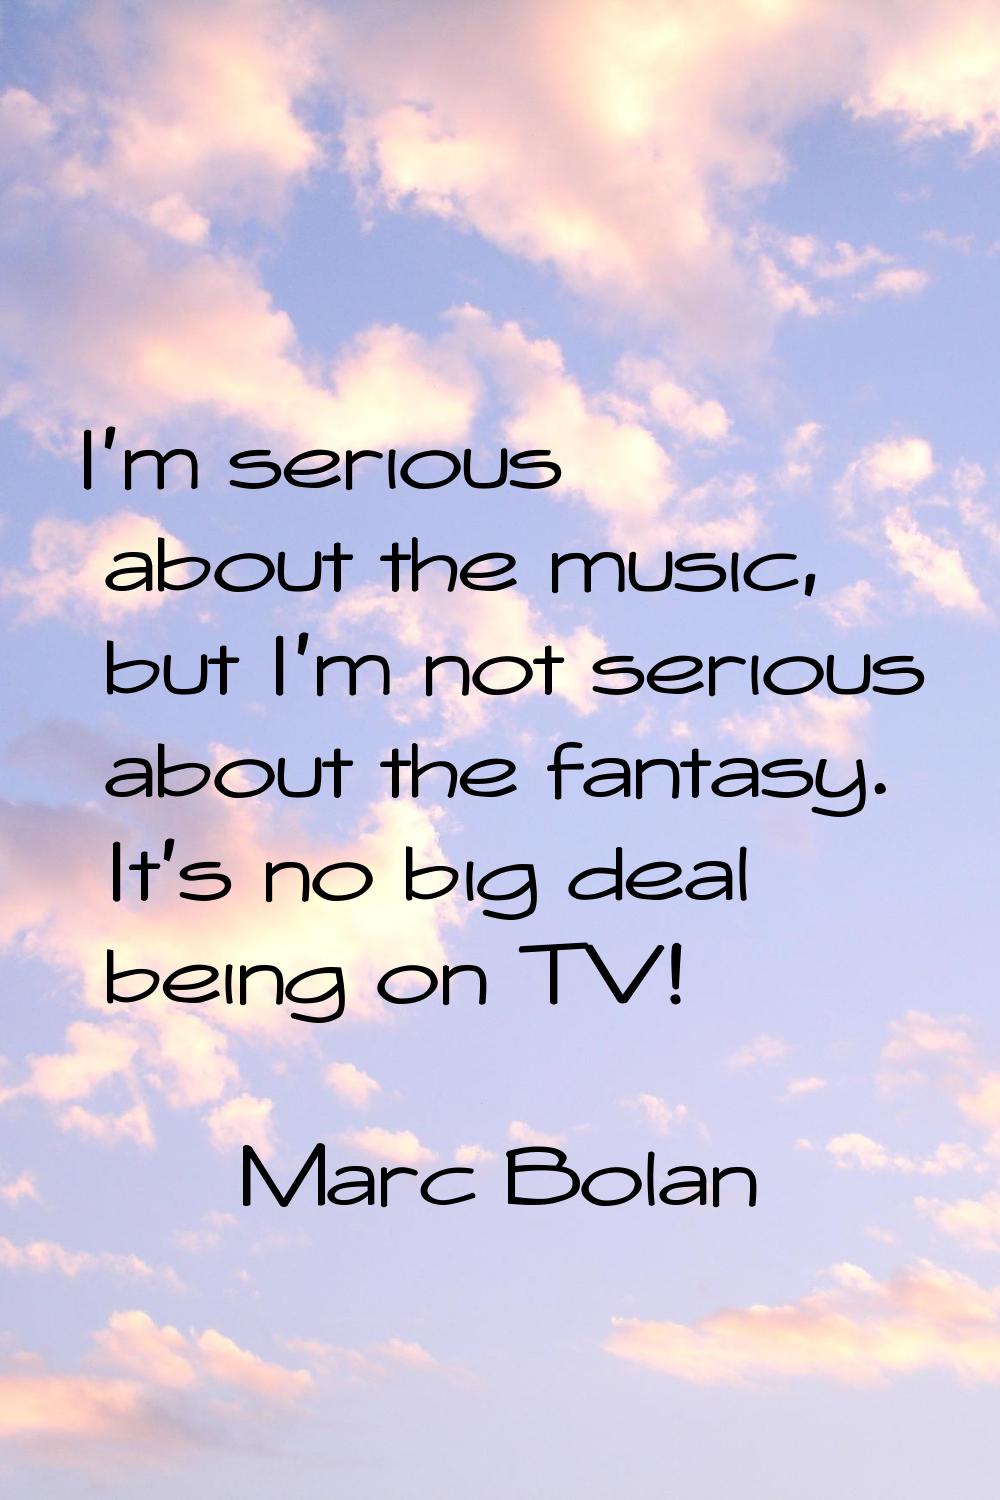 I'm serious about the music, but I'm not serious about the fantasy. It's no big deal being on TV!